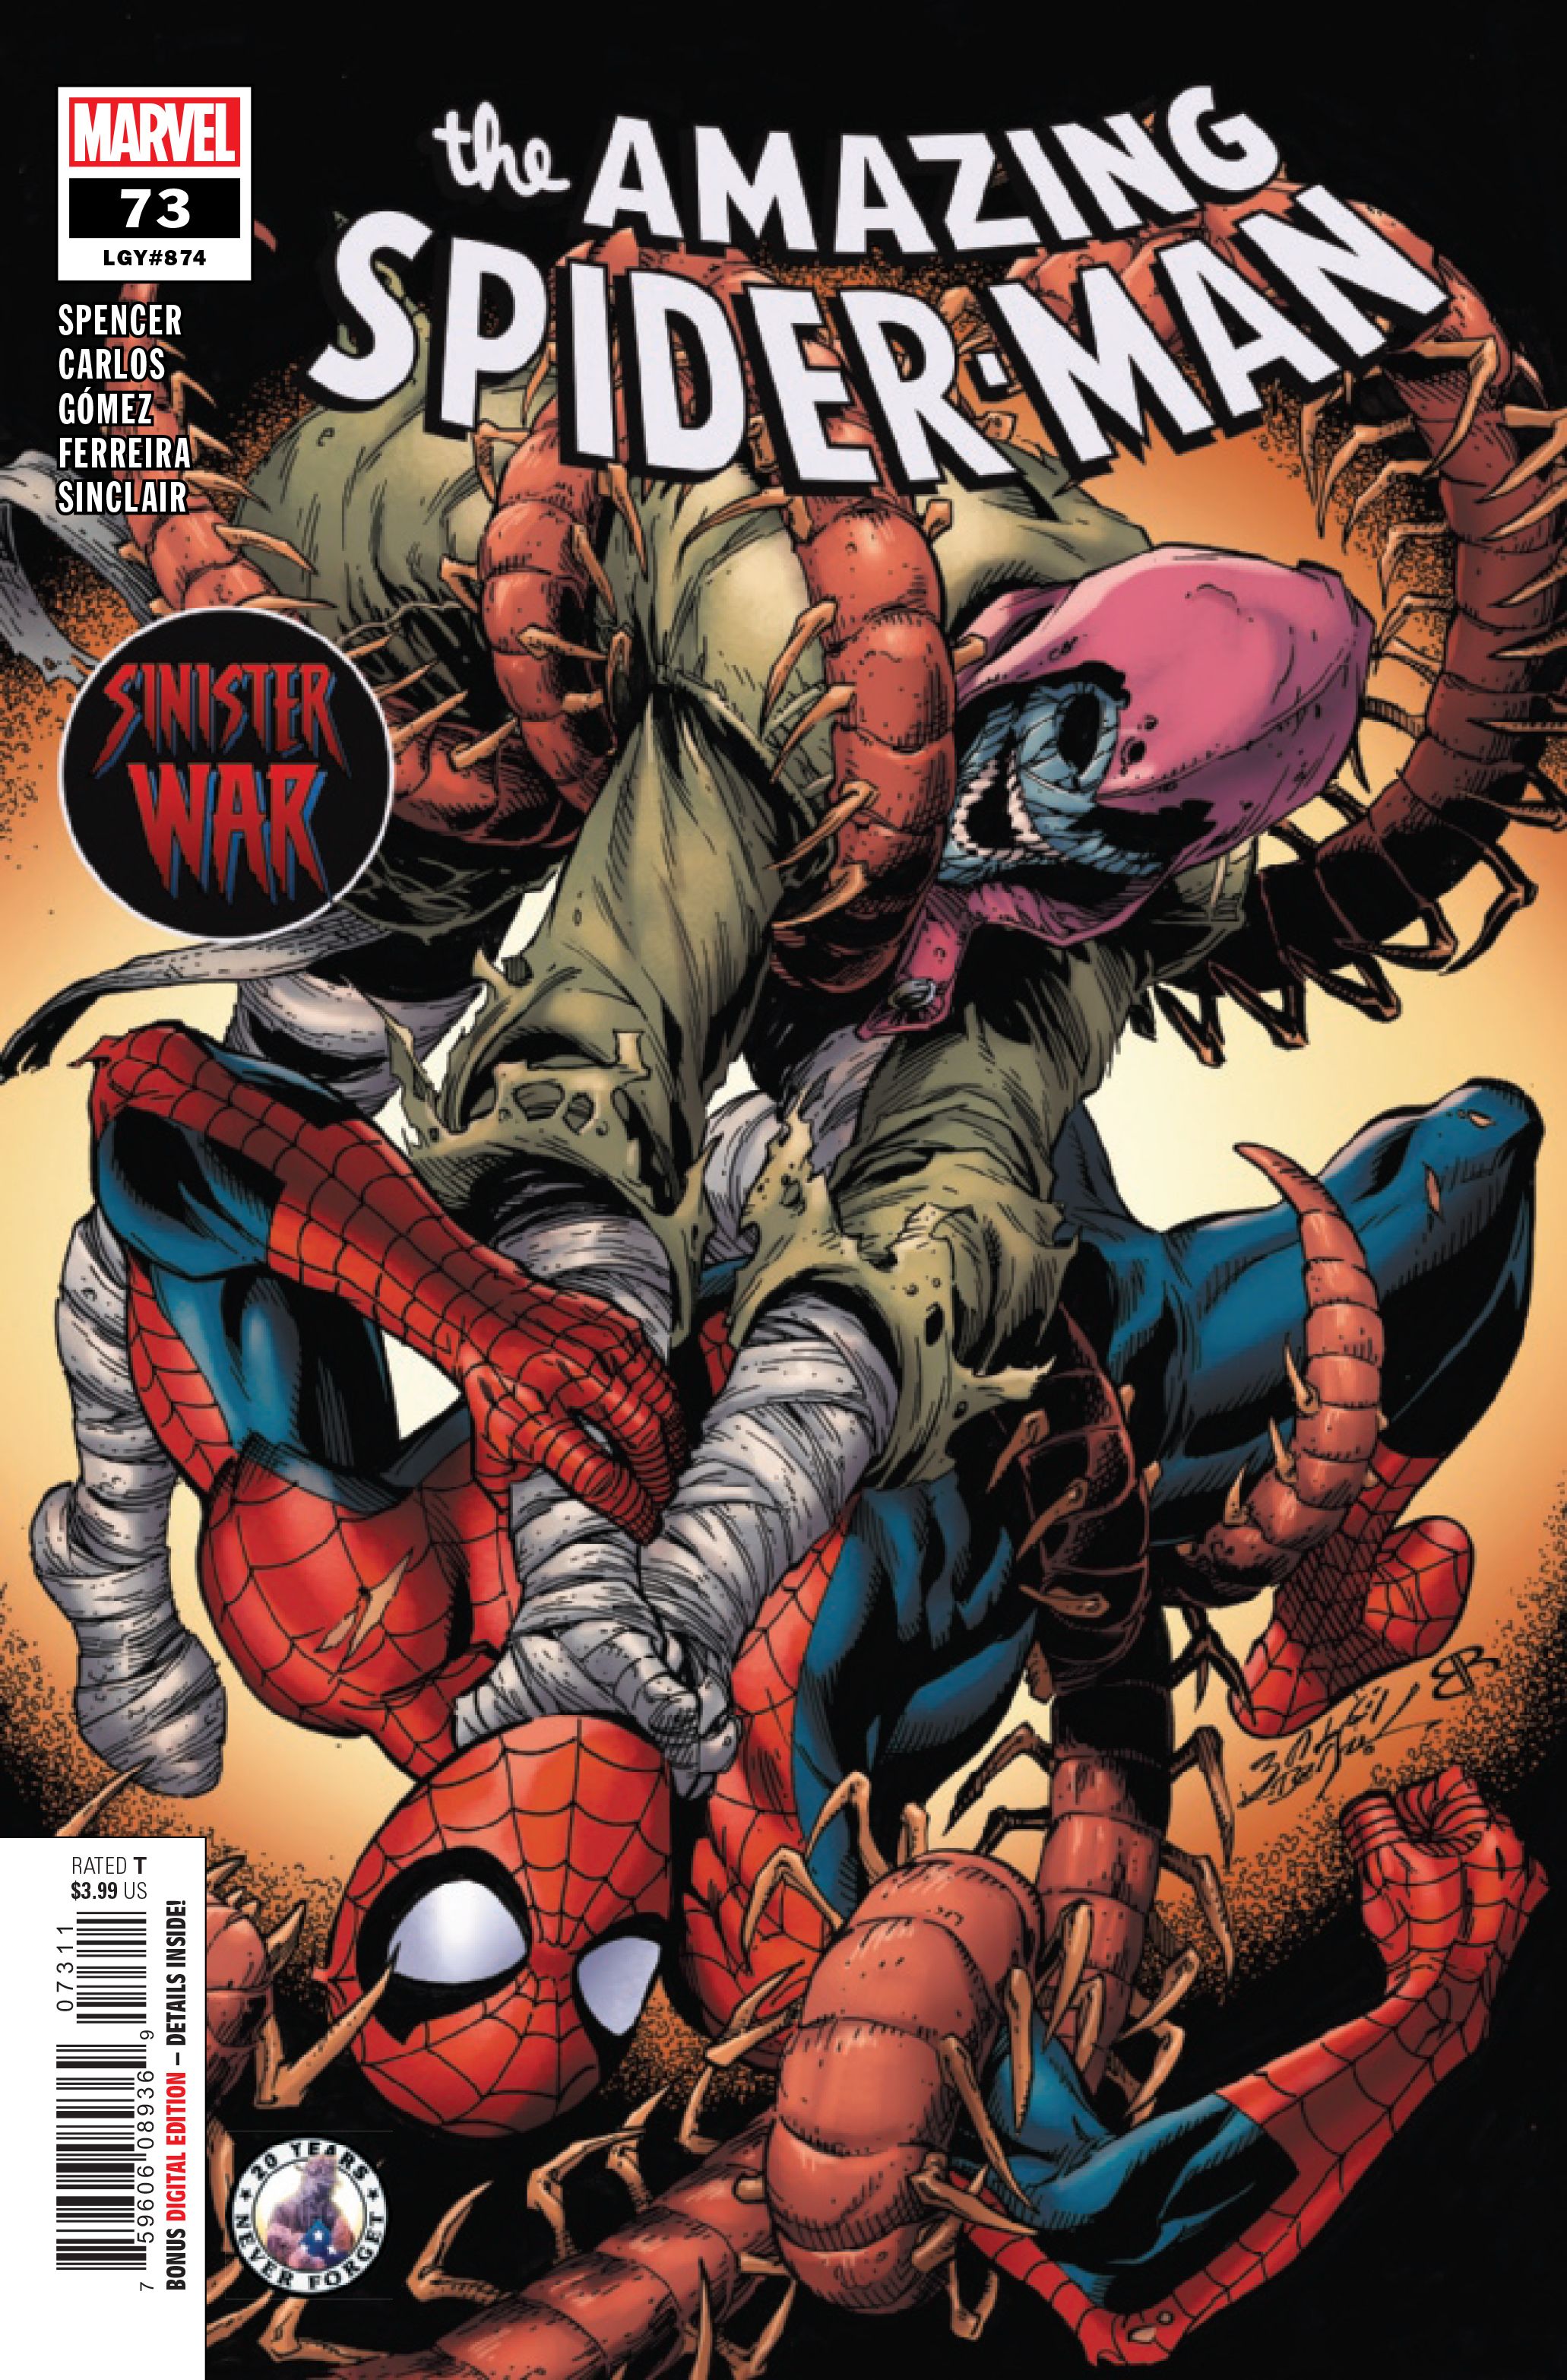 The cover for Amazing Spider-Man #73, by Nick Spencer, Zé Carlos, Carlos Gómez and Marcelo Ferreira.